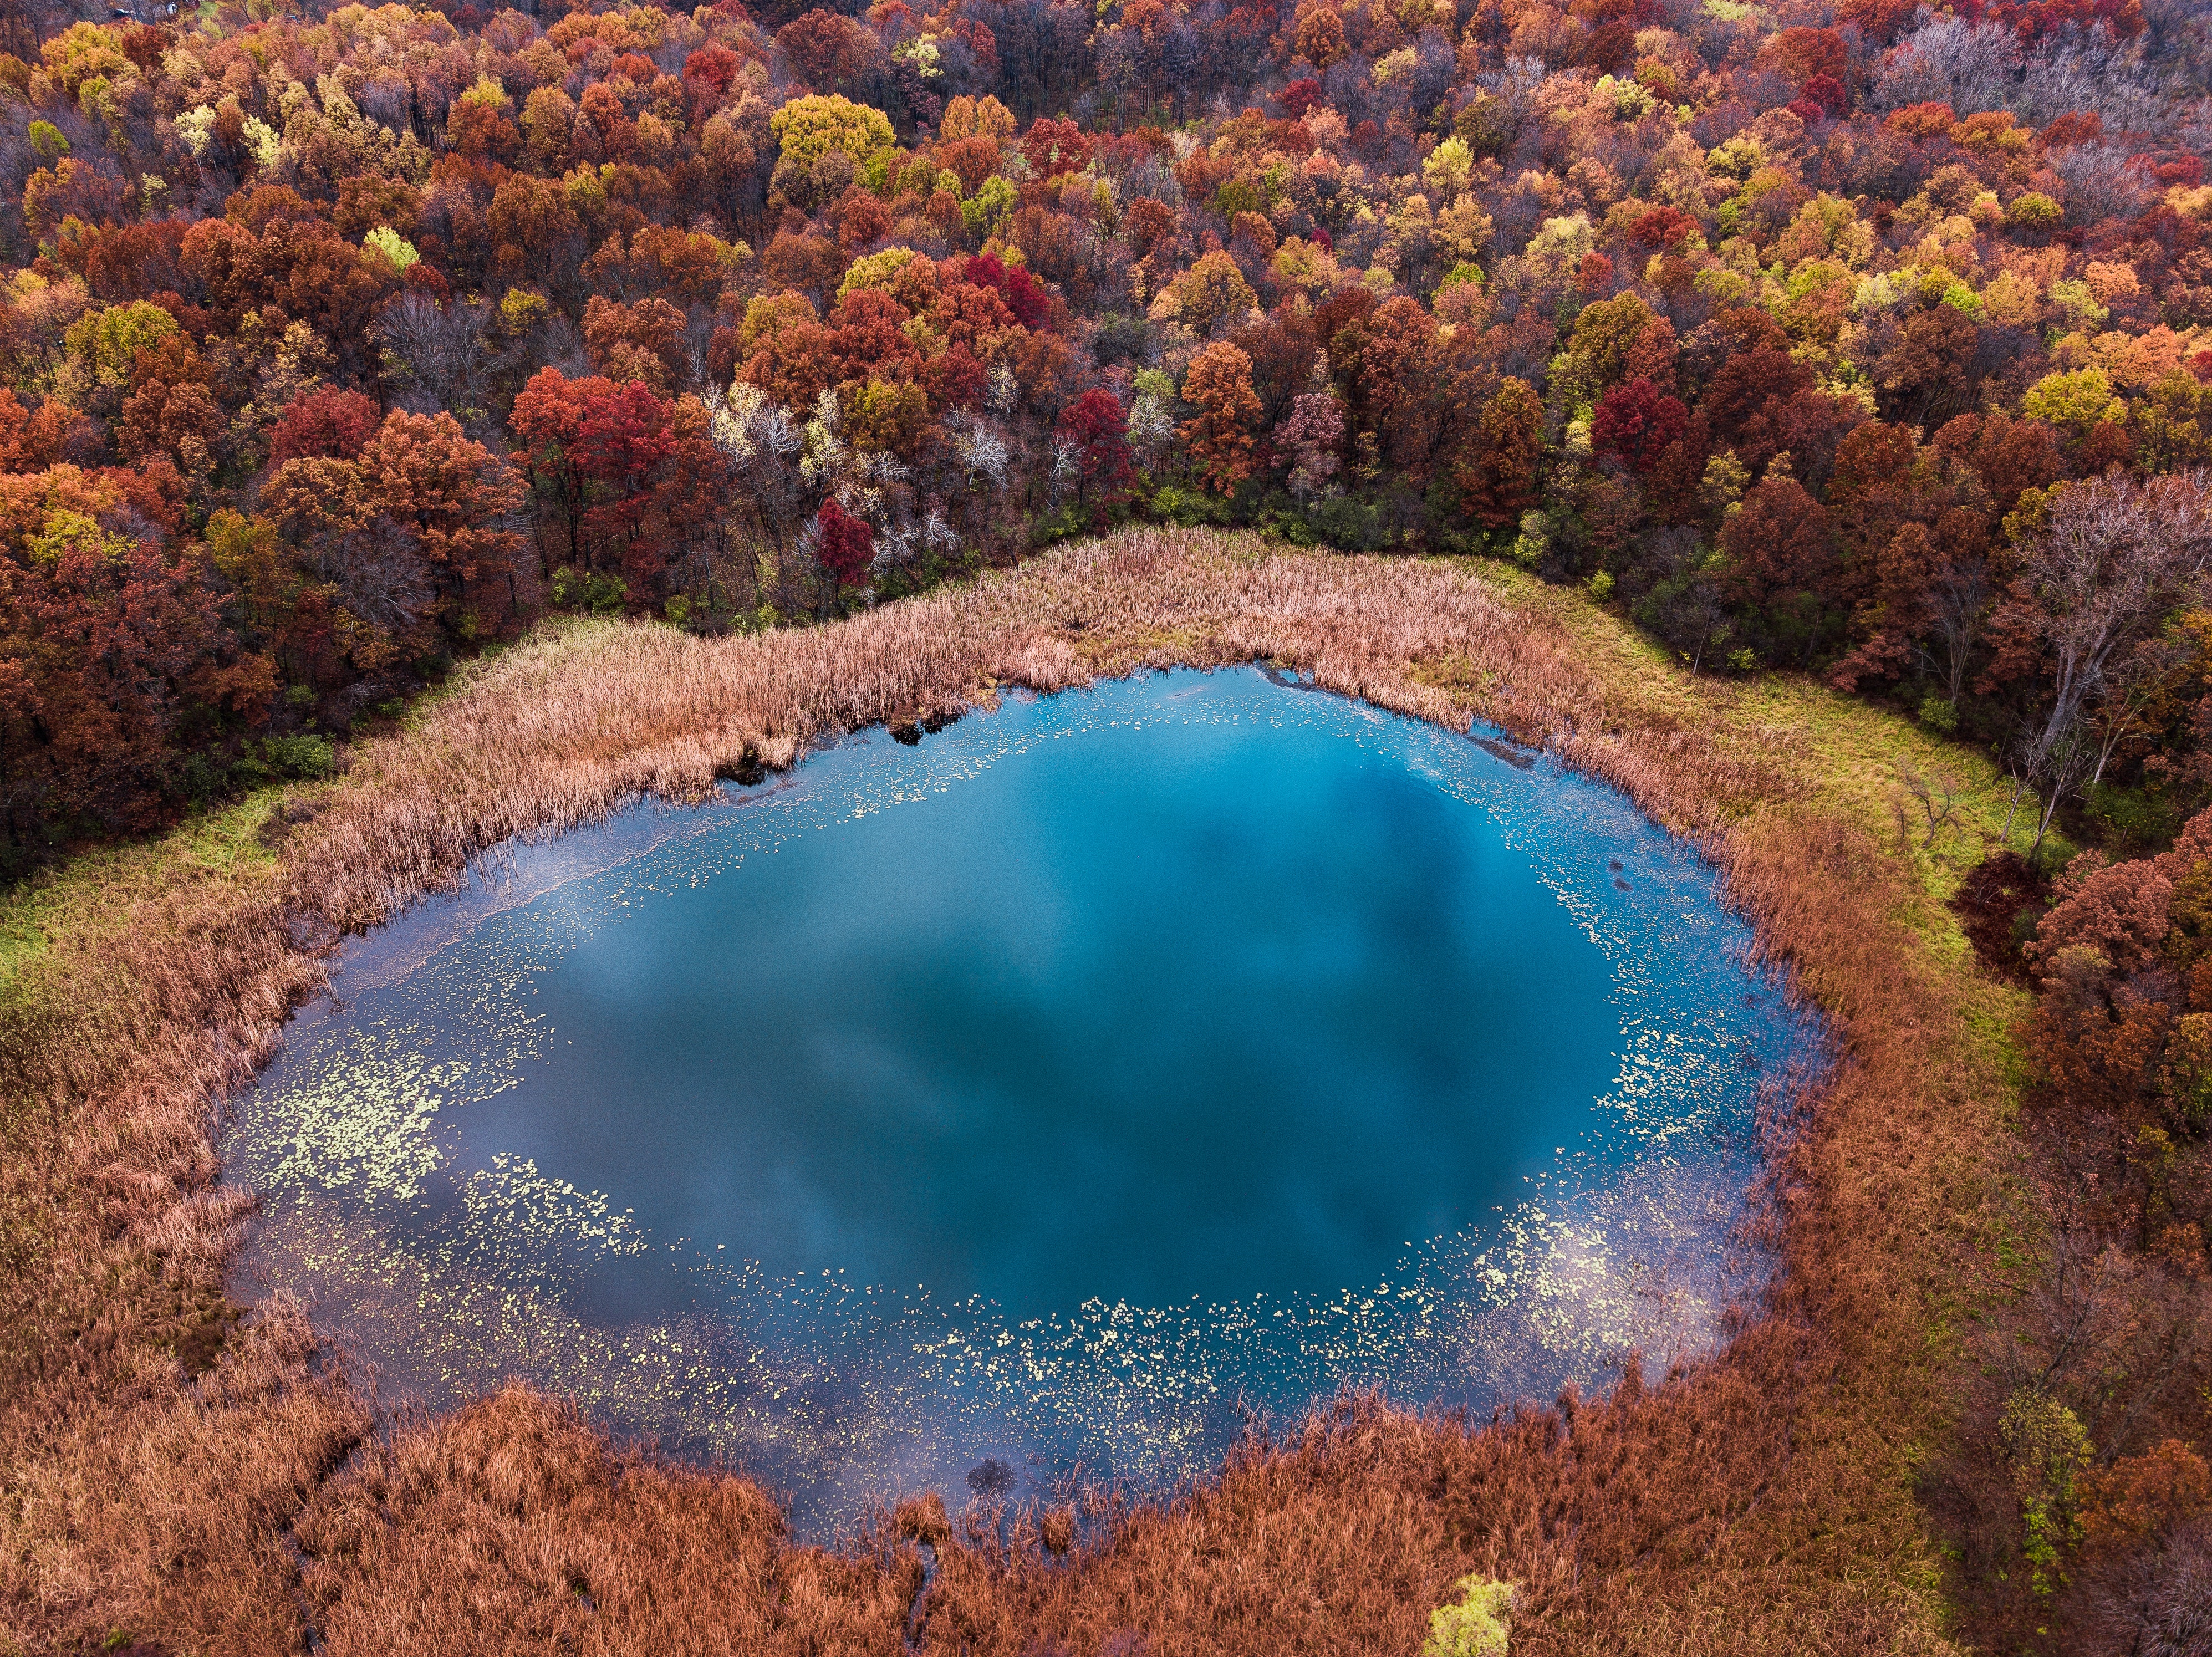 General 3990x2989 nature fall trees pond water